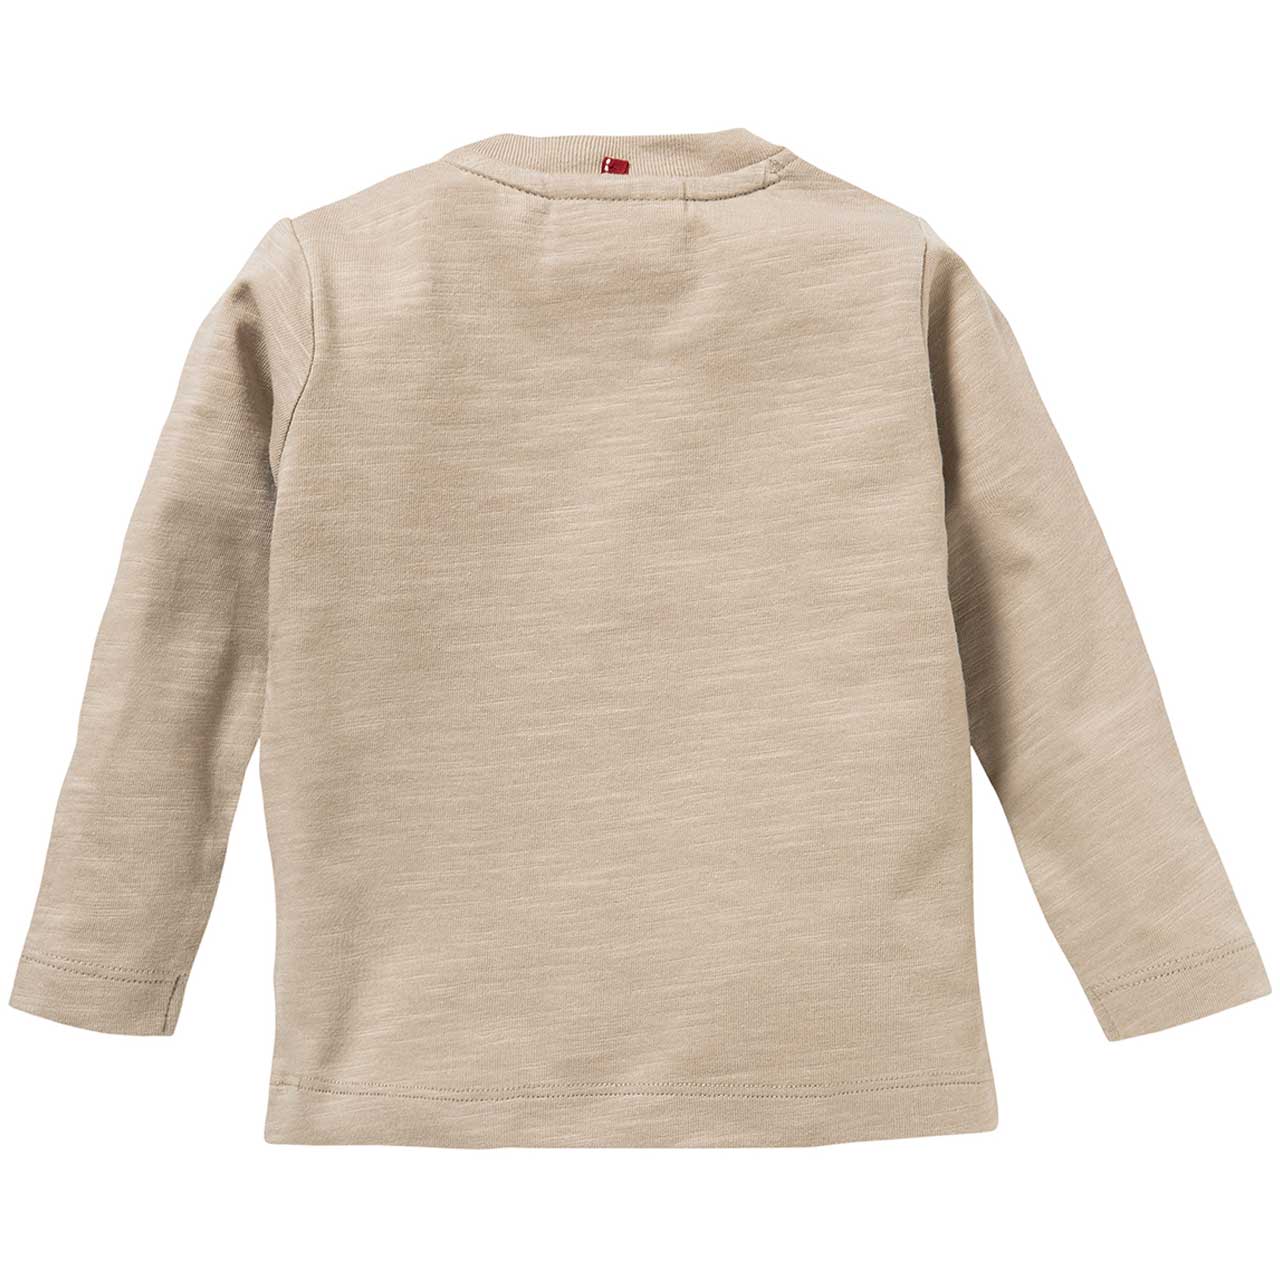 Weiches Langarmshirt Monster taupe